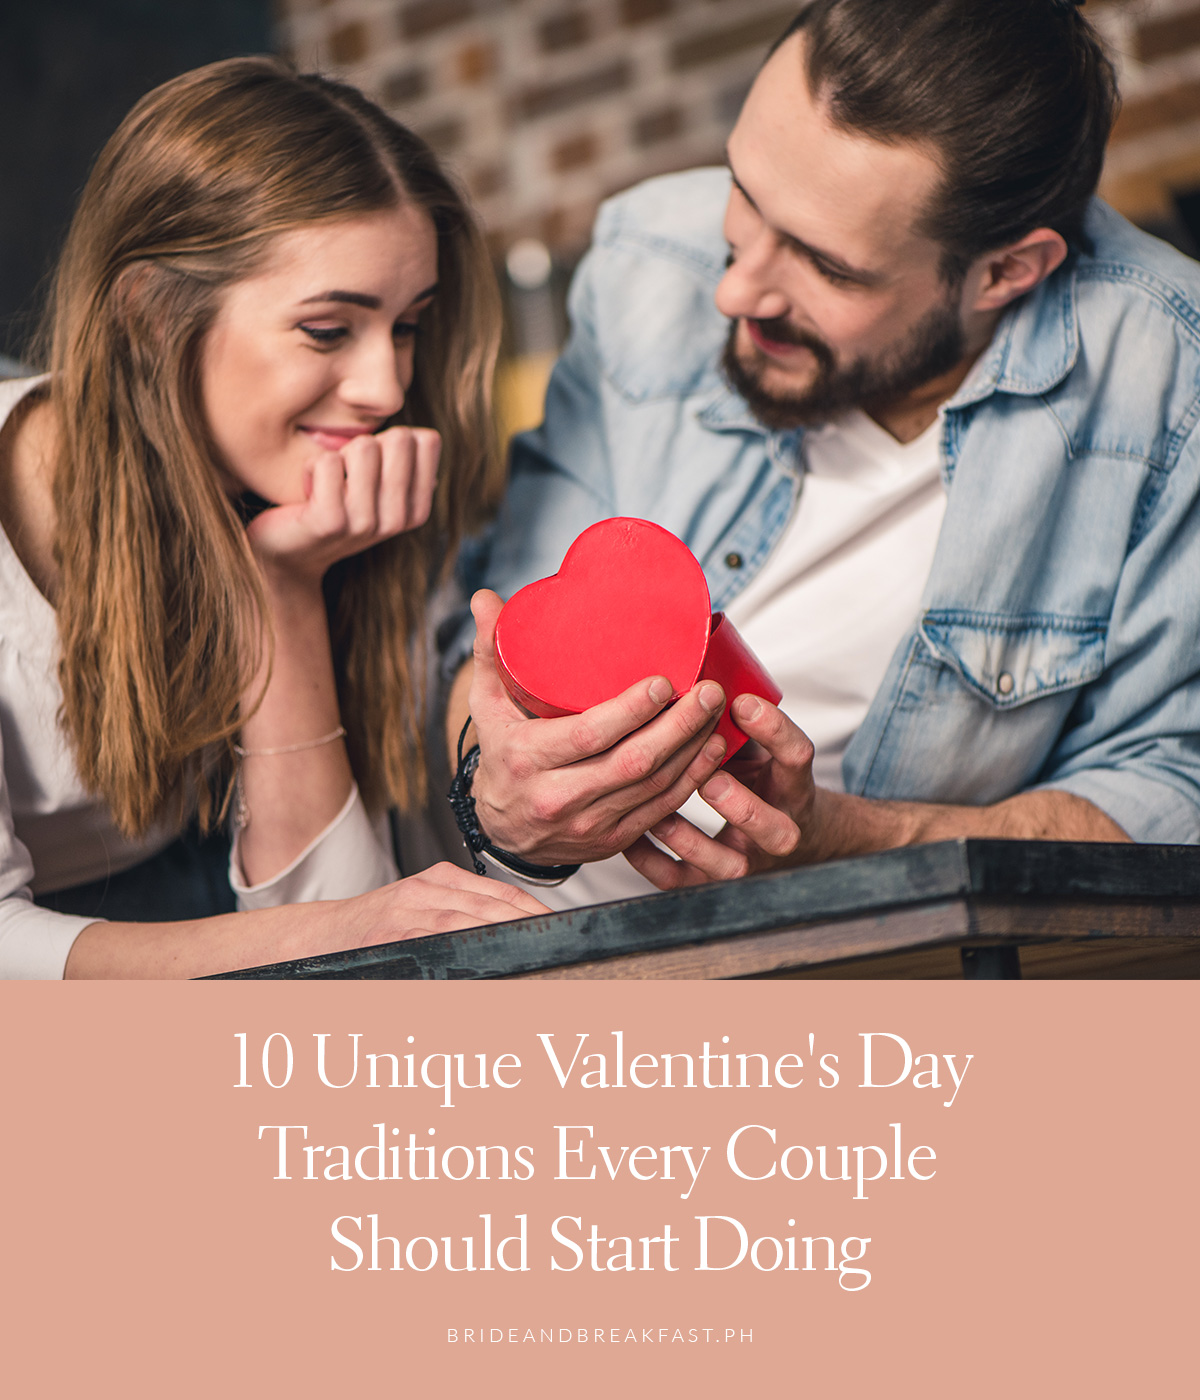 10 Unique Valentine's Day Traditions Every Couple Should Start Doing